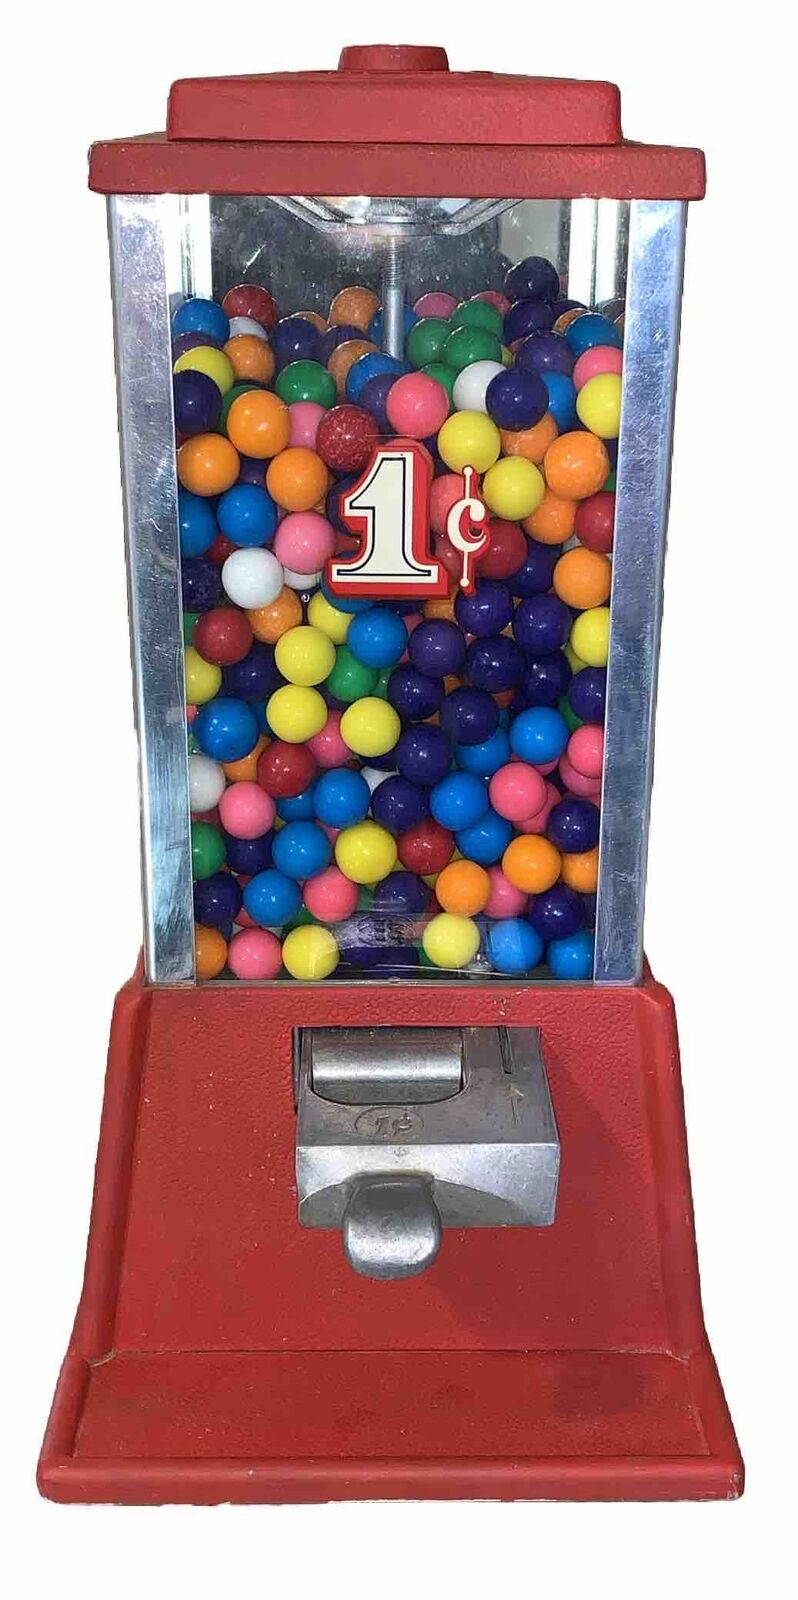 Gum Ball Machine 1 Cent  Dean Penny Arcade Products Red  Co. Cent  Key Needed